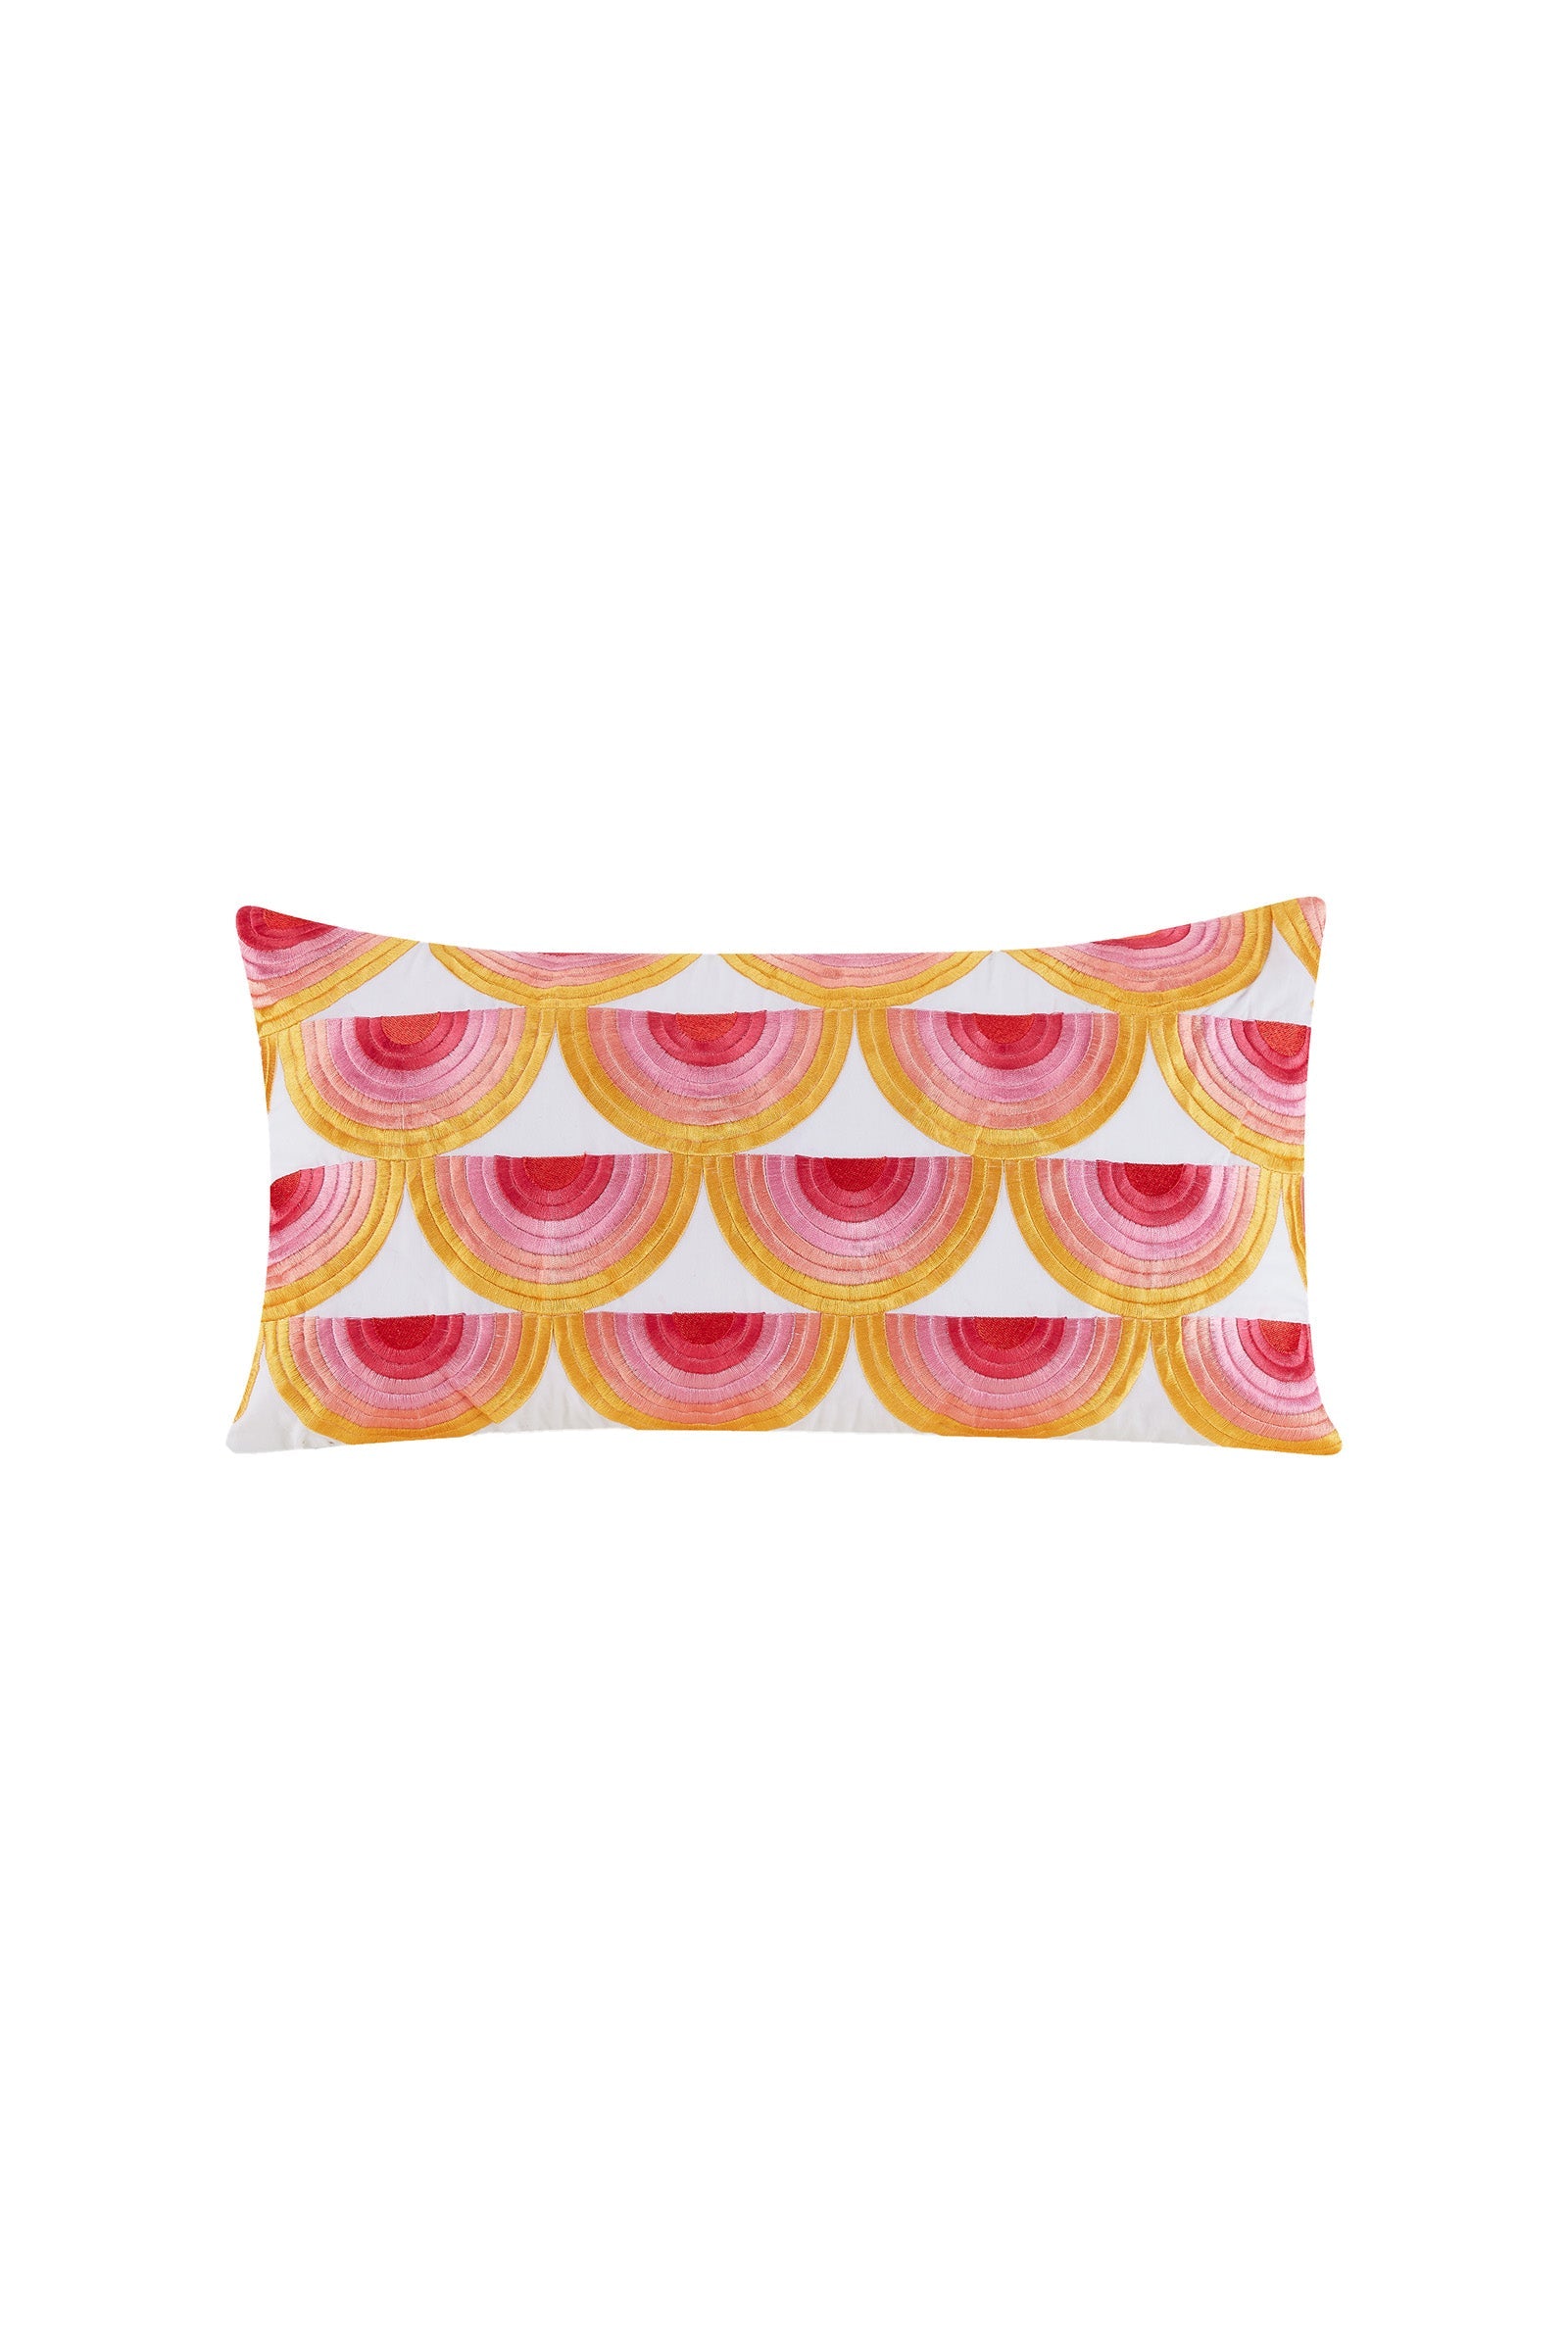 SATIN STITCH EMBROIDERED PINK/YELLOW THROW PILLOW